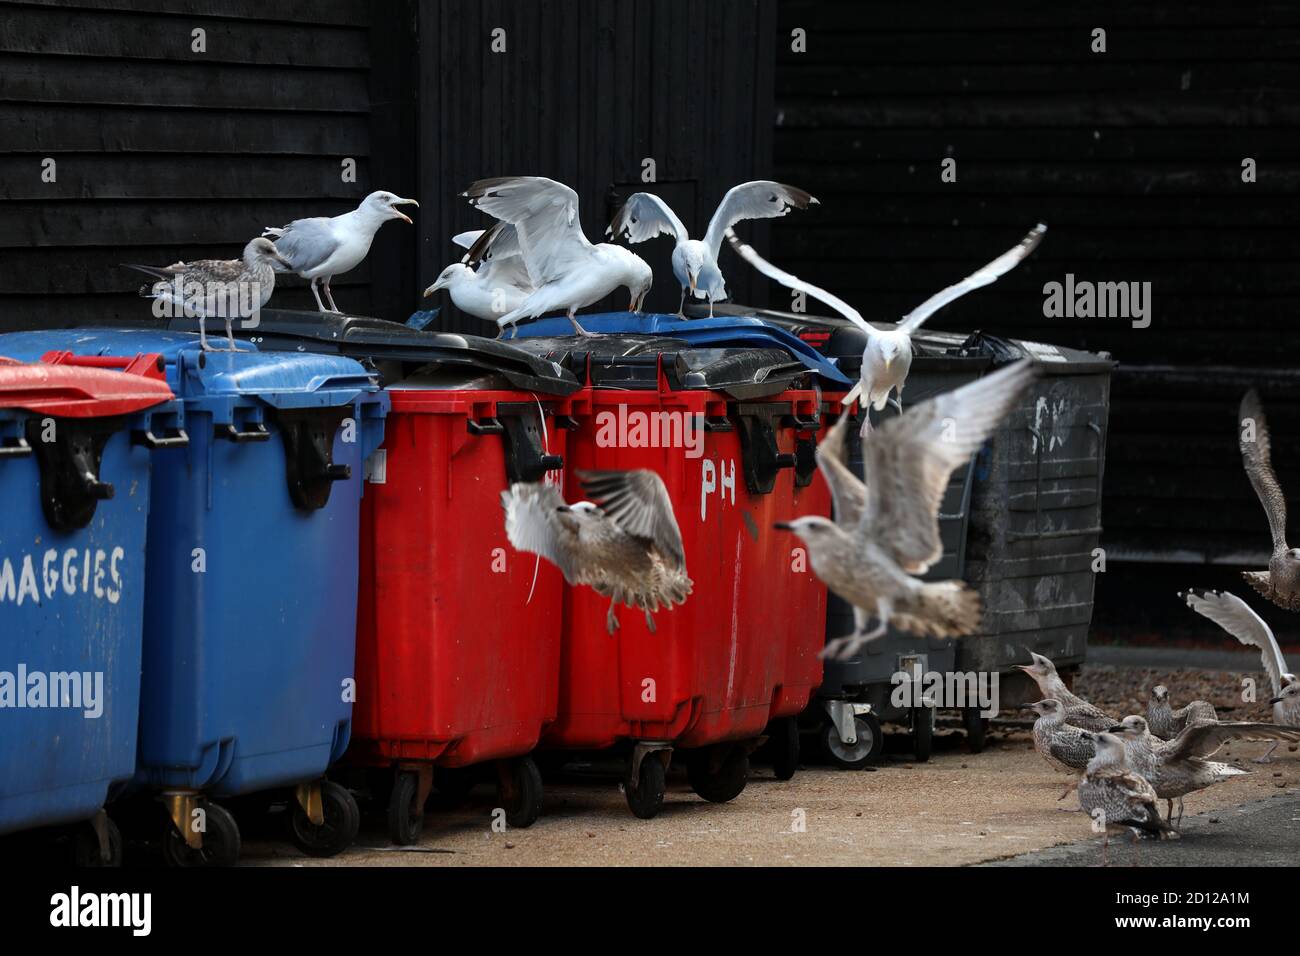 Seagulls fighting over fish around the bins at the fish market in Hastings, East Sussex, UK. Stock Photo